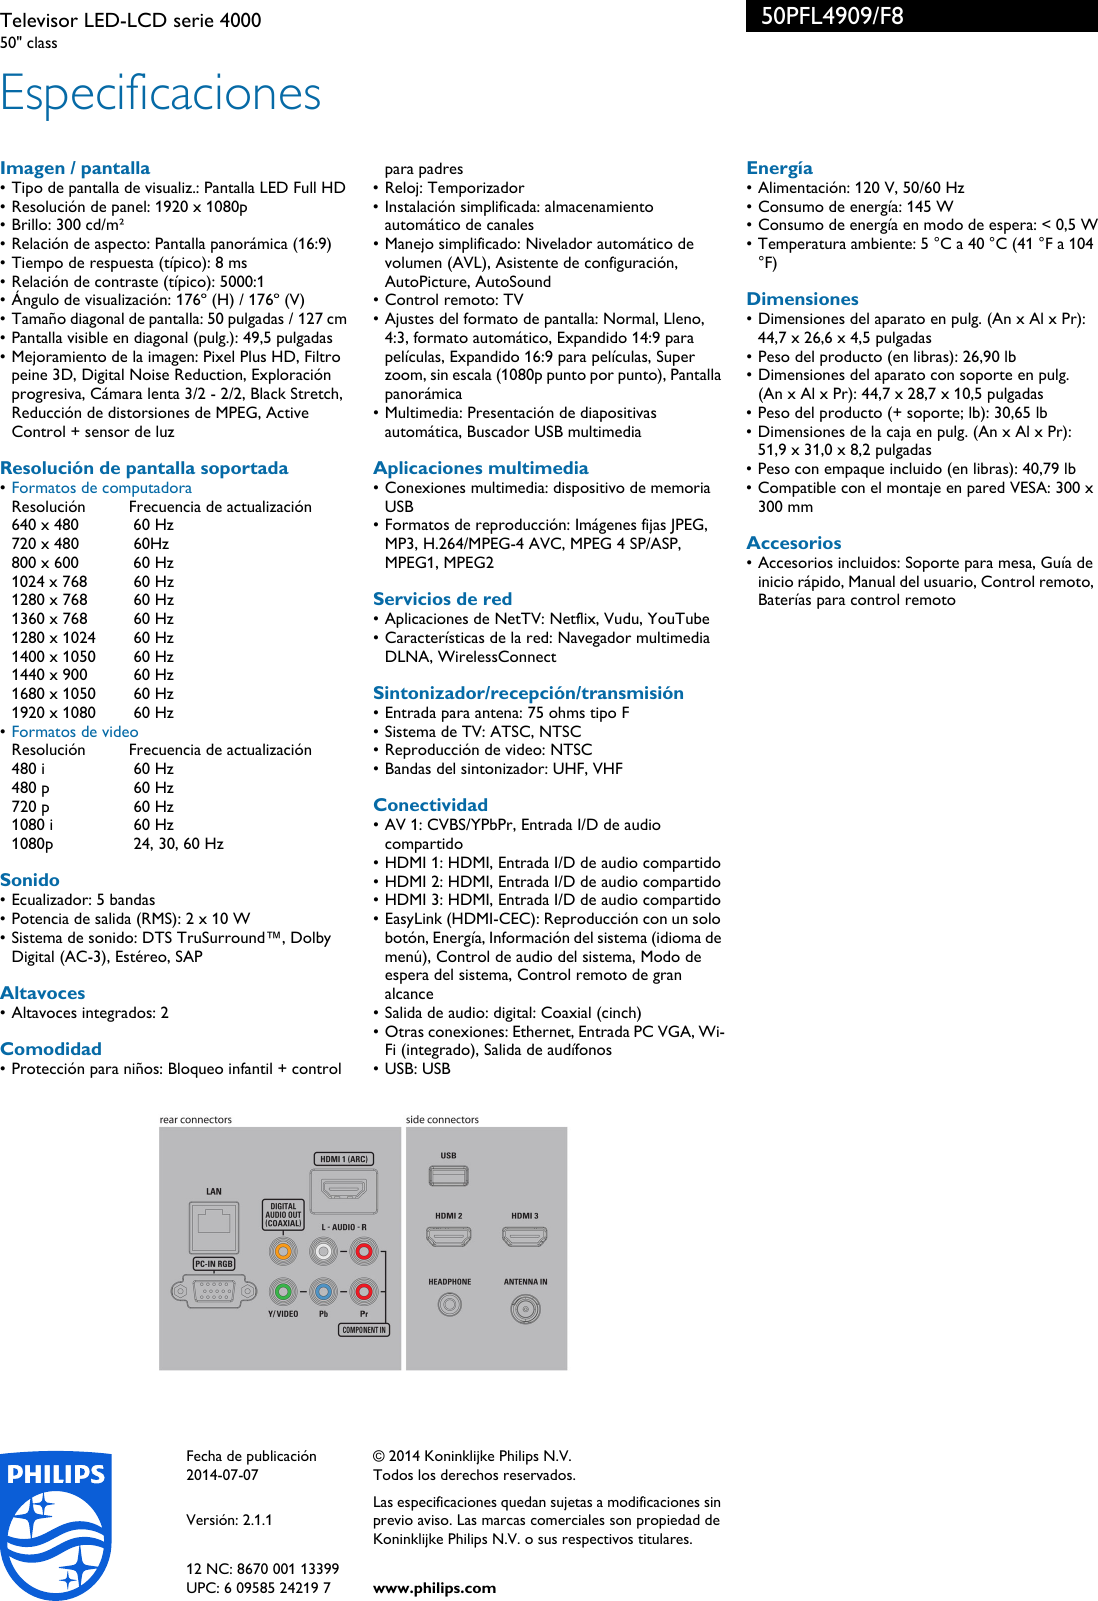 Page 3 of 3 - Philips 50PFL4909/F8 Televisor LED-LCD Serie 4000 User Manual Folleto 50pfl4909 F8 Pss Lspco